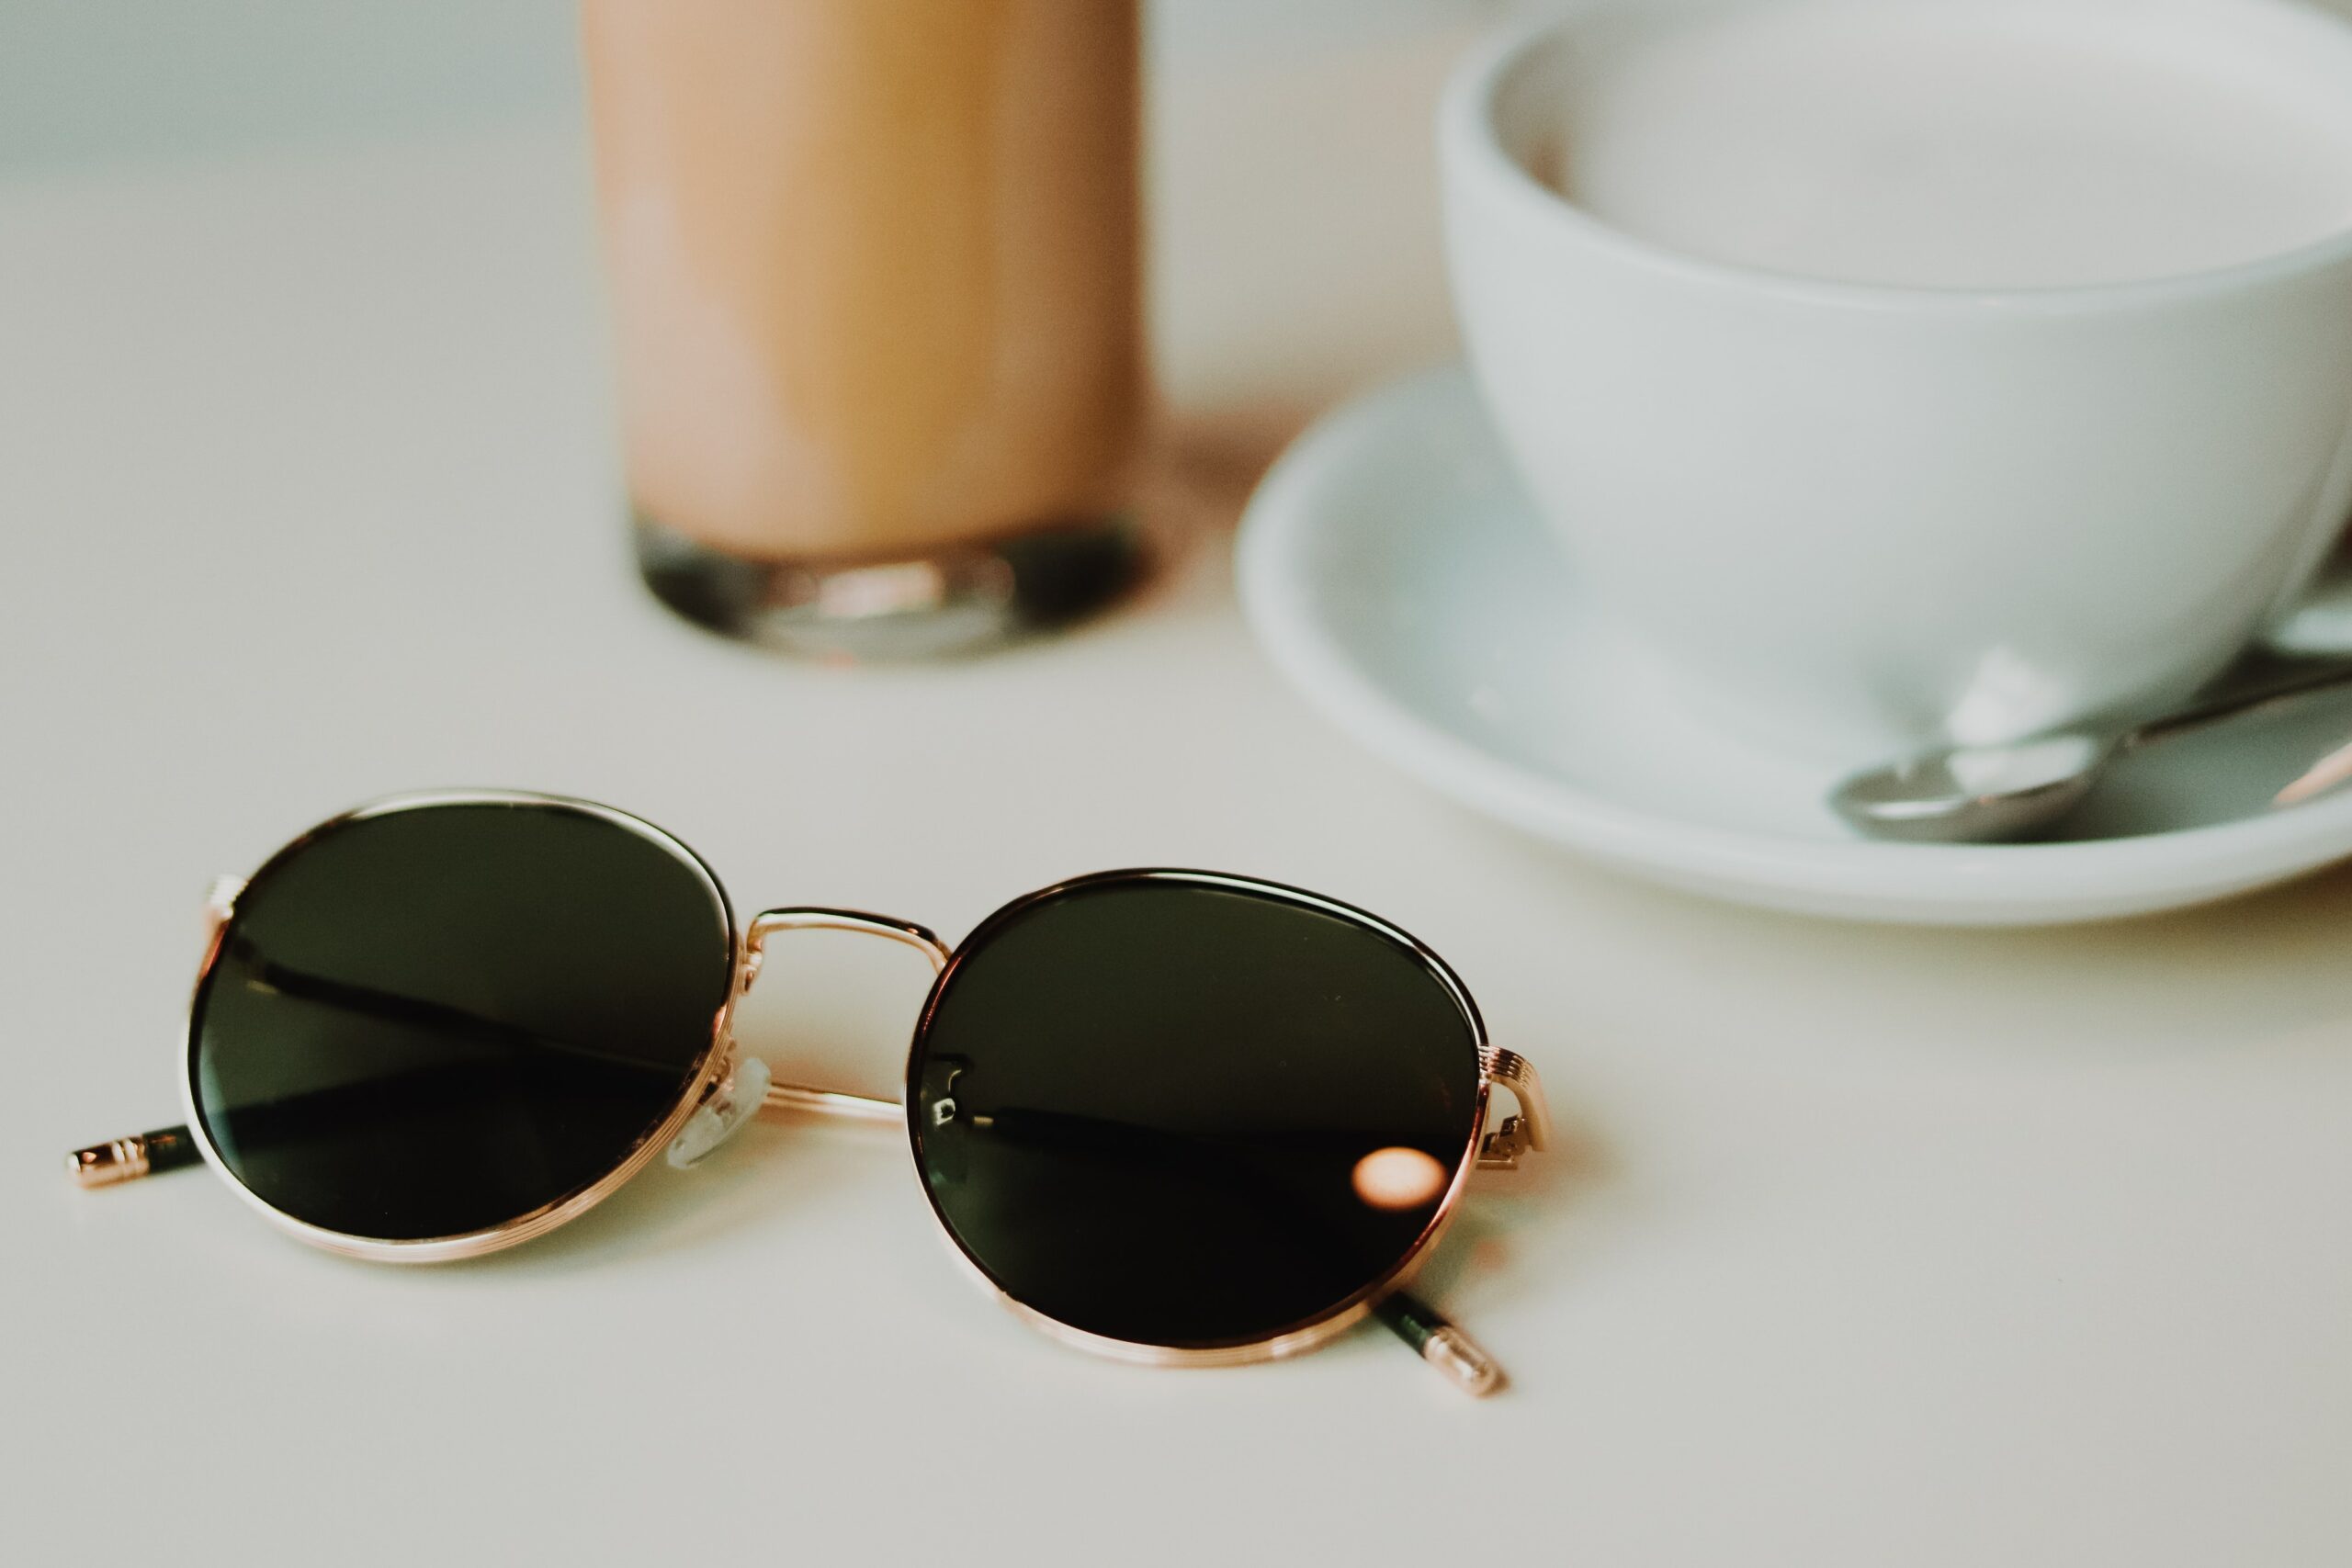 Sunglasses and coffee cup